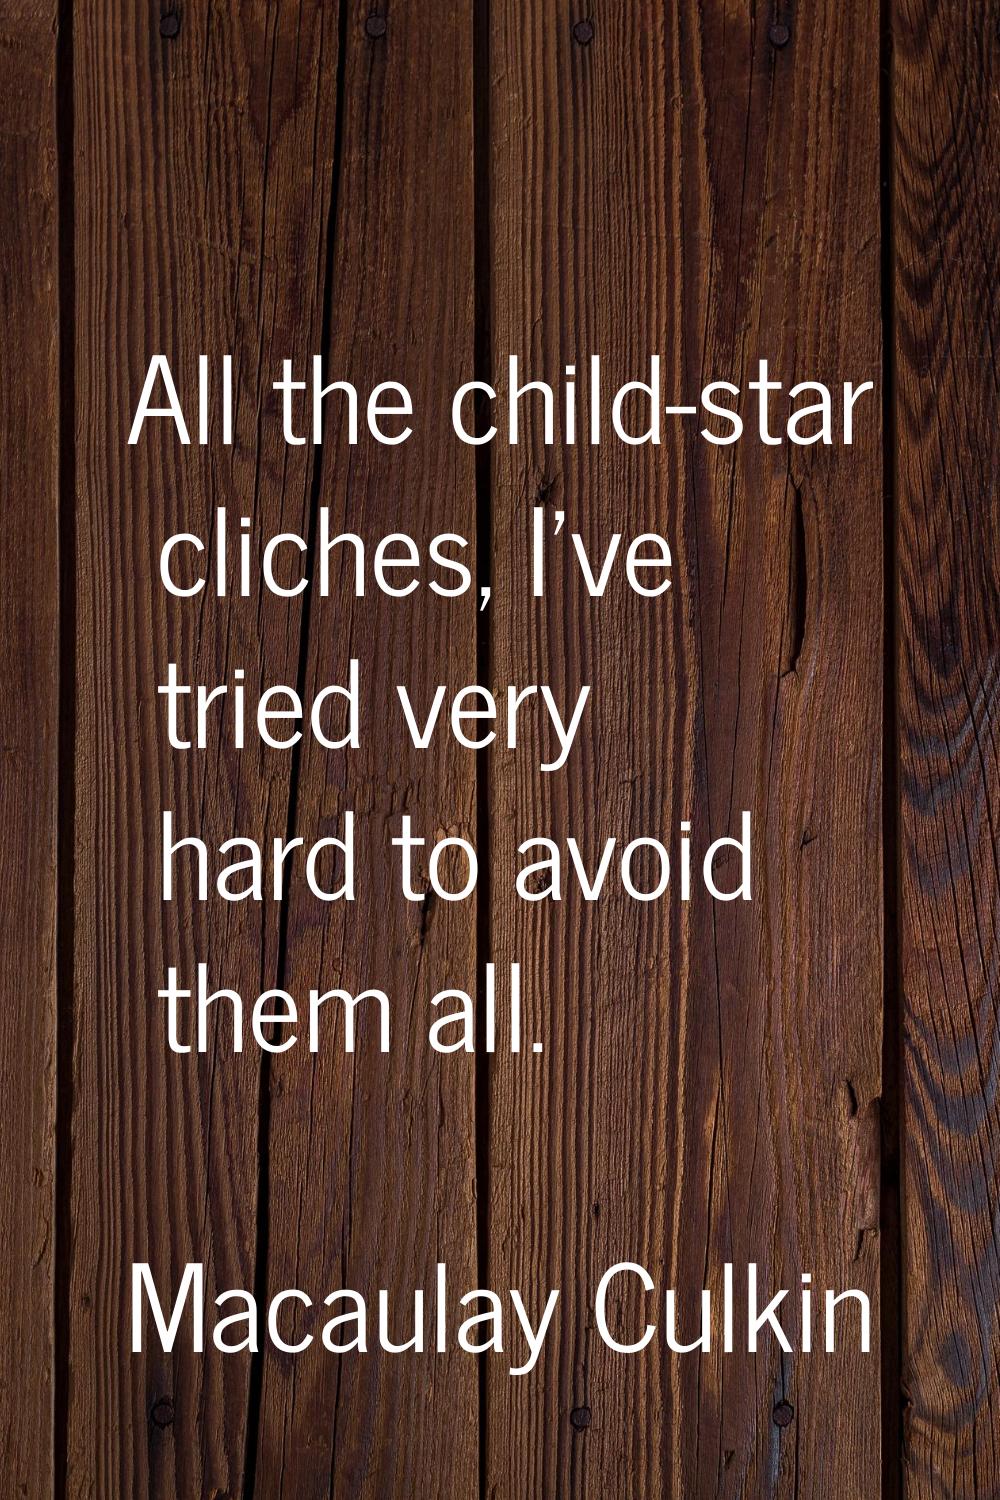 All the child-star cliches, I've tried very hard to avoid them all.